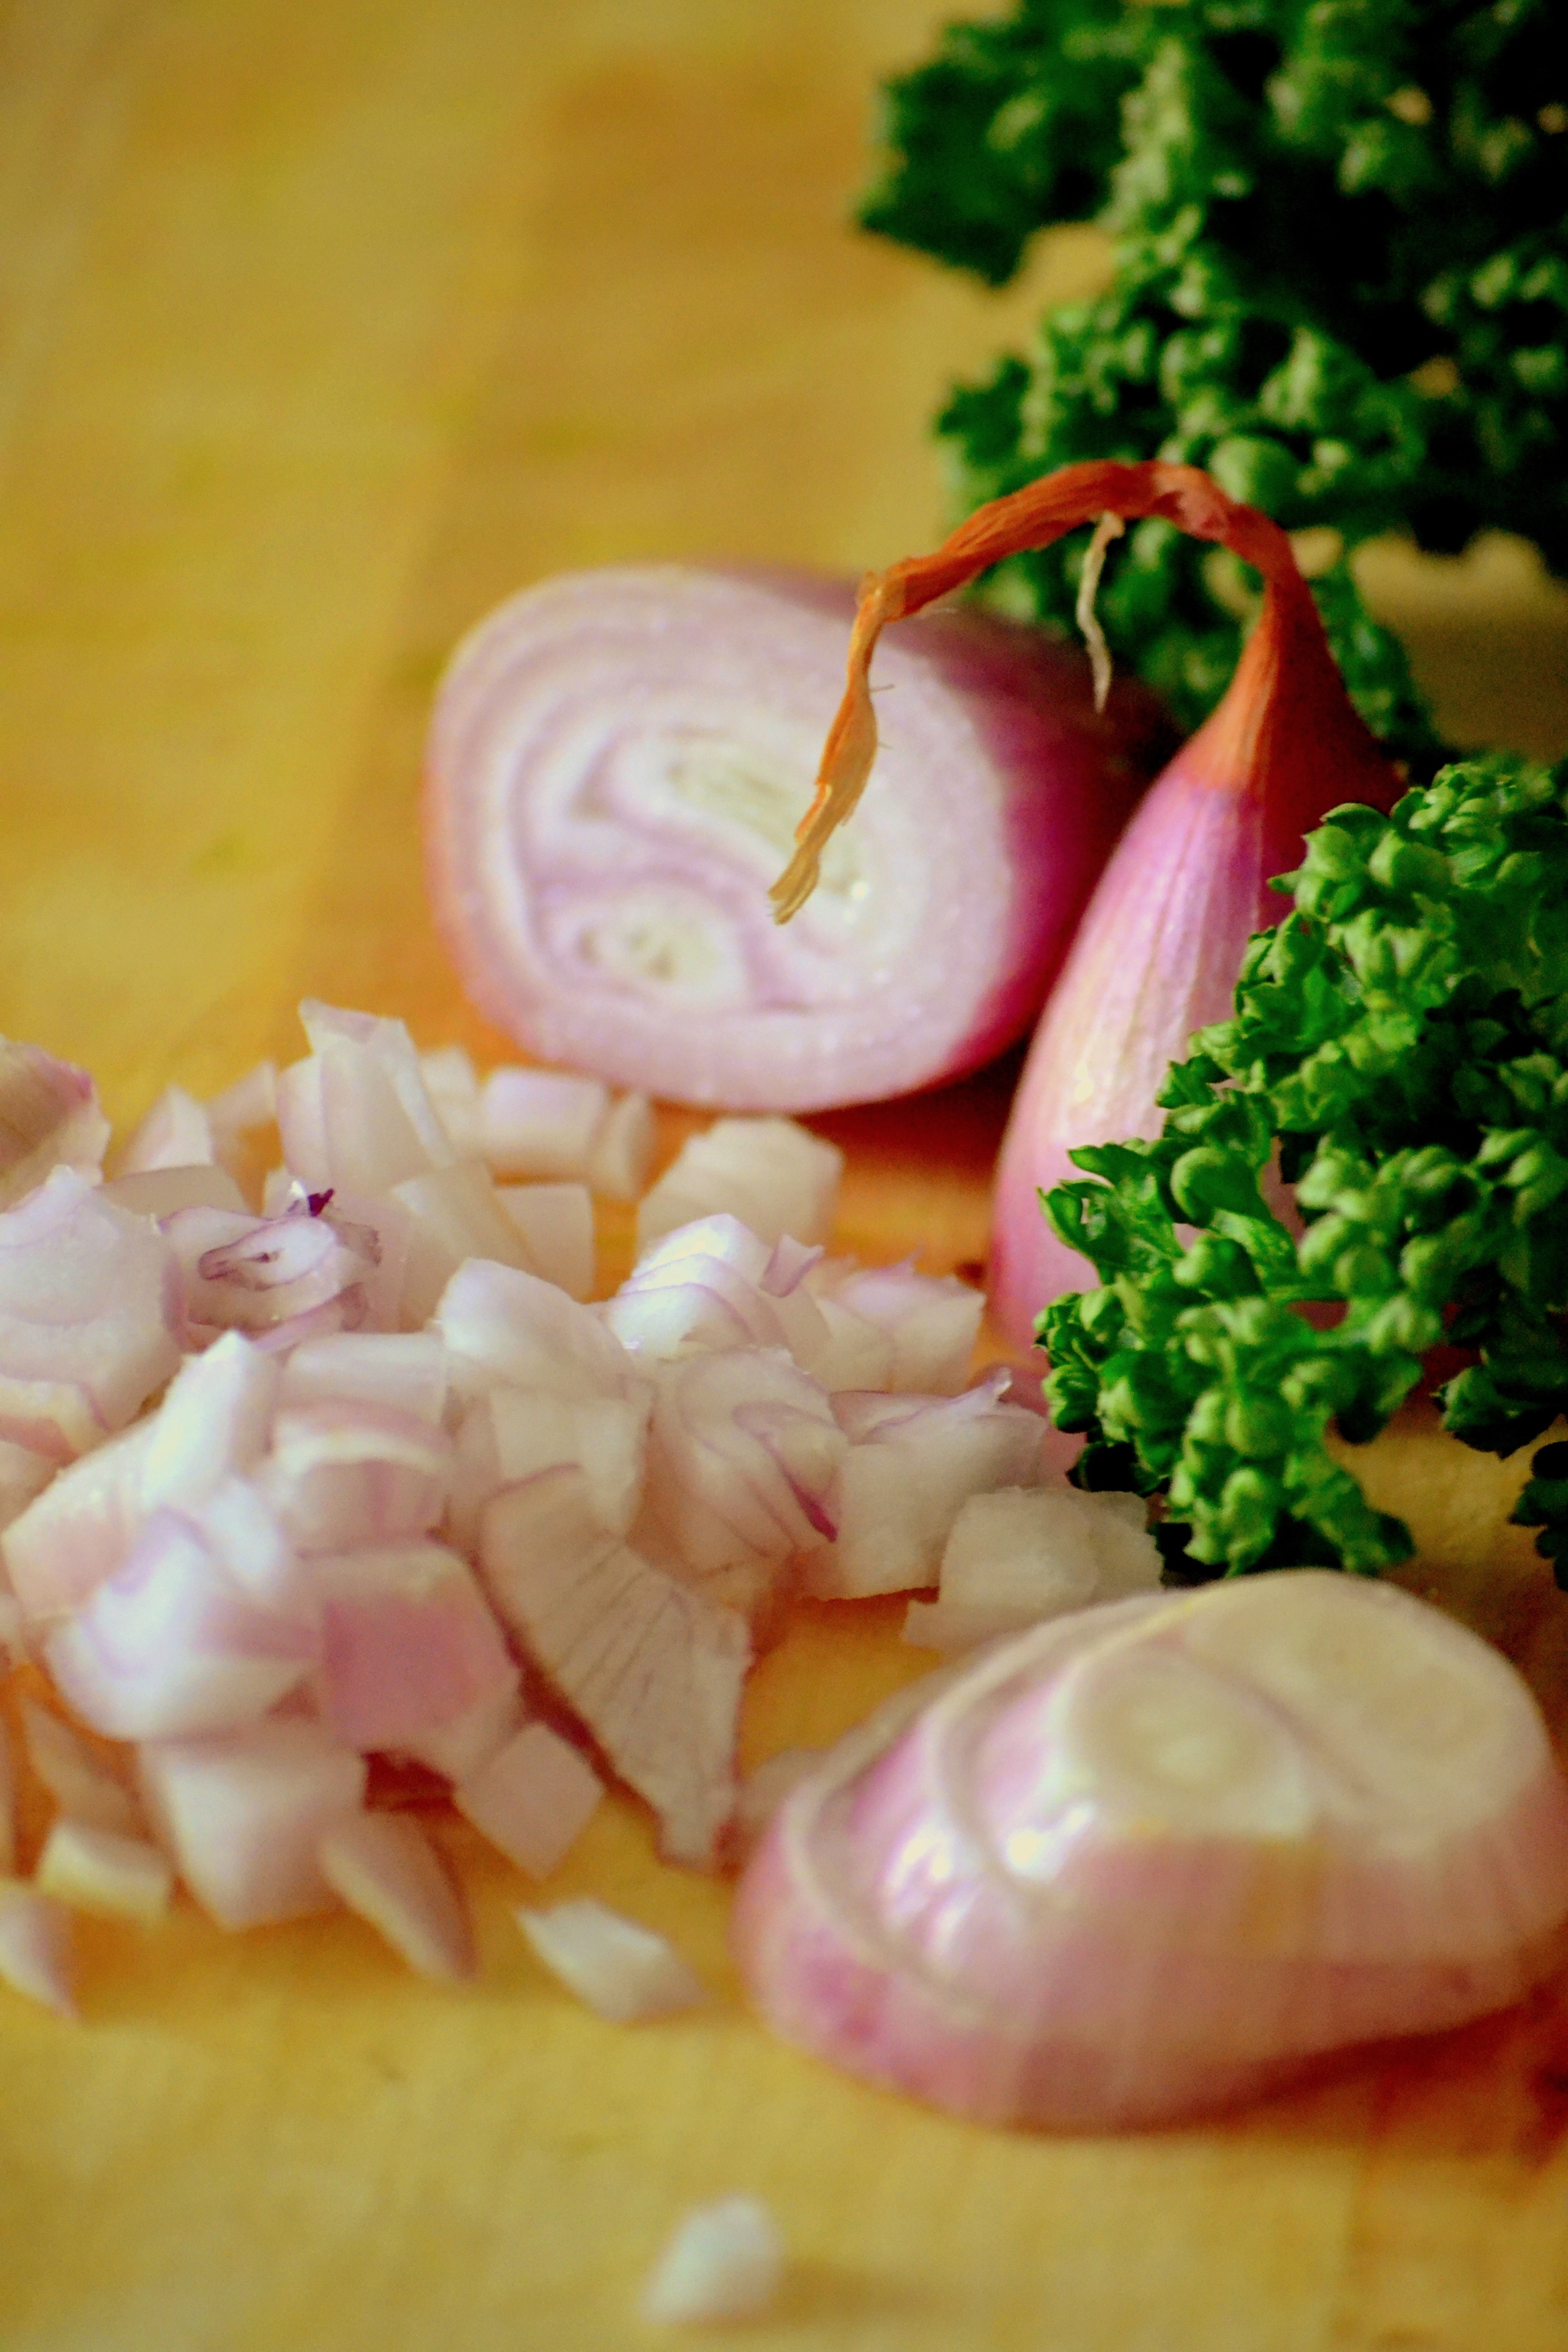 Onions, Raw, Parsley, Healthy, Nutrition, food and drink, food